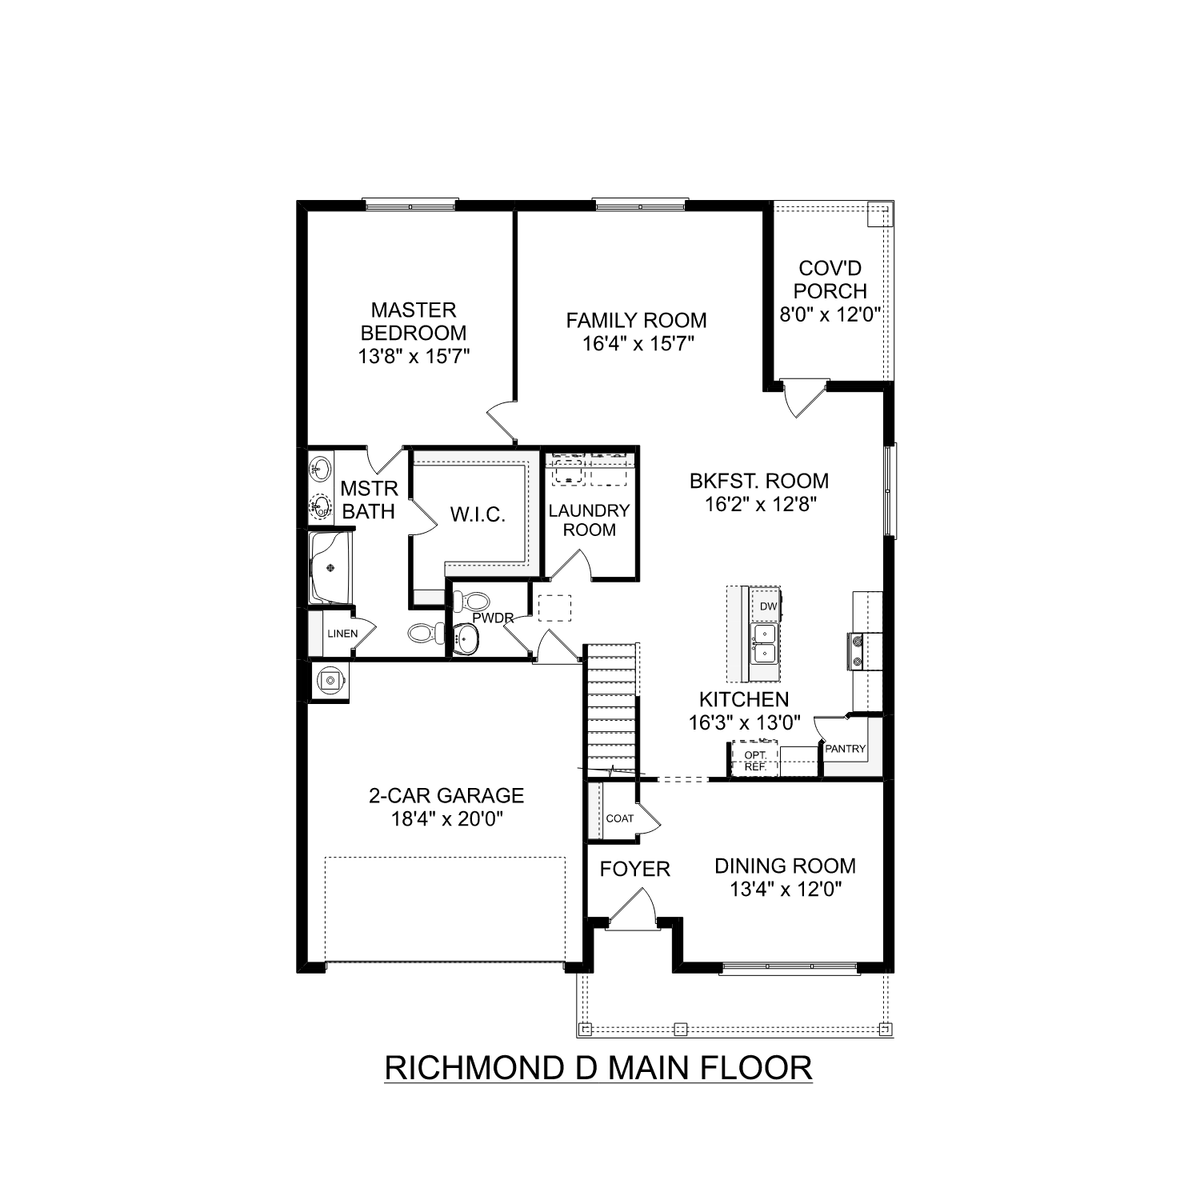 1 - The Richmond D buildable floor plan layout in Davidson Homes' Walker's Hill community.